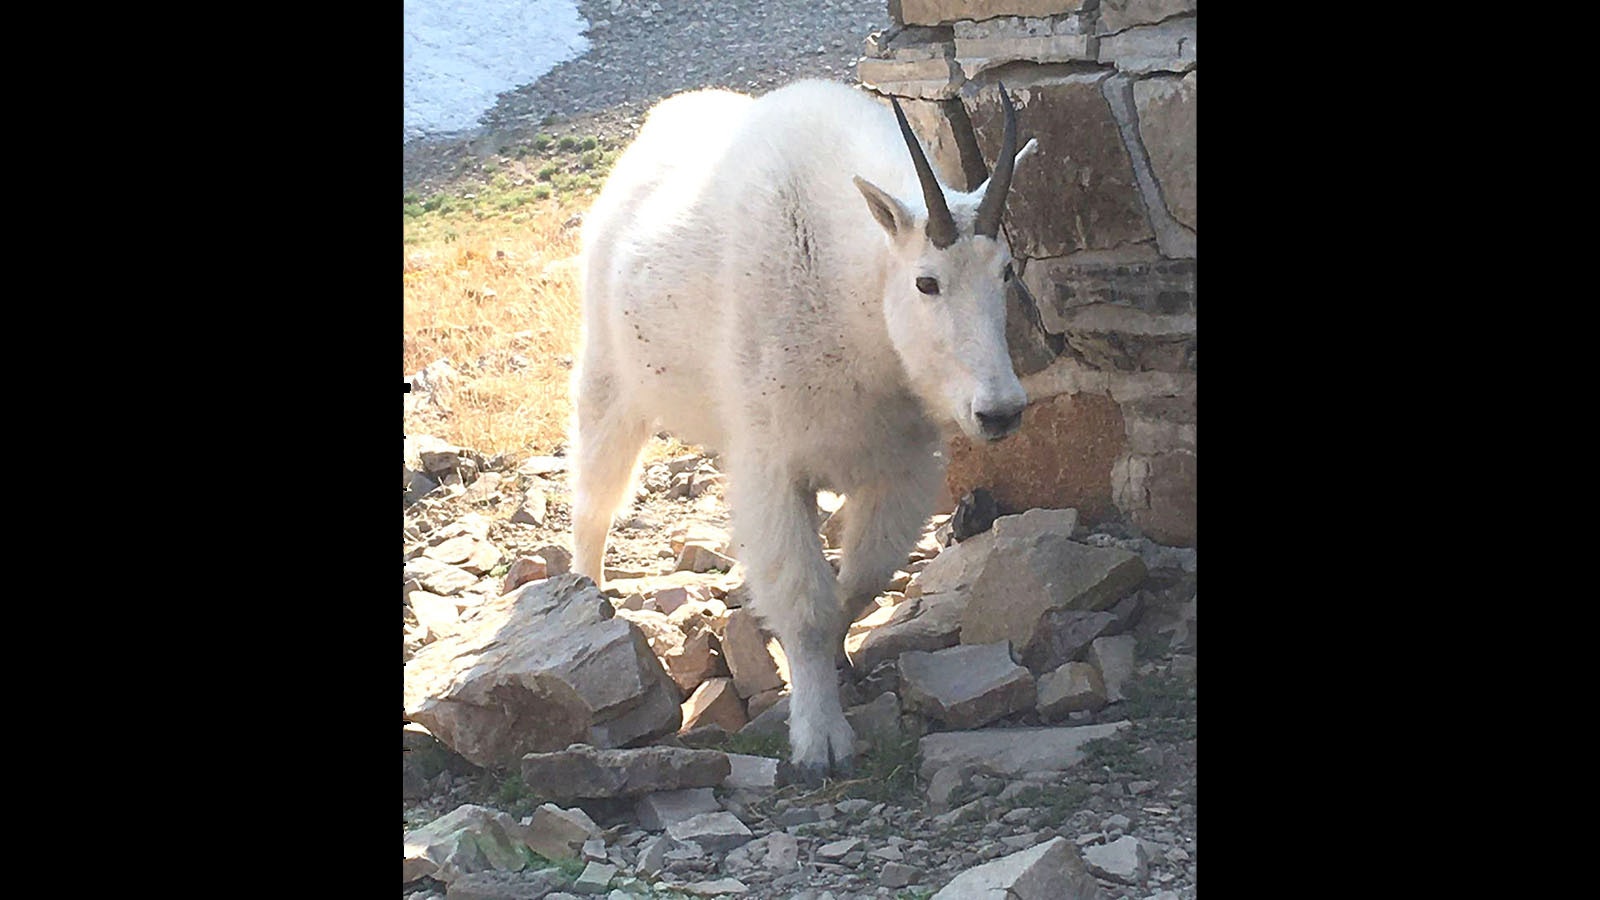 Mountain goats have lost most of their fear of people on crowded hiking trails in Utah’s Mount Timpanogos wilderness area. The goats have killed three dogs there in the last three weeks.